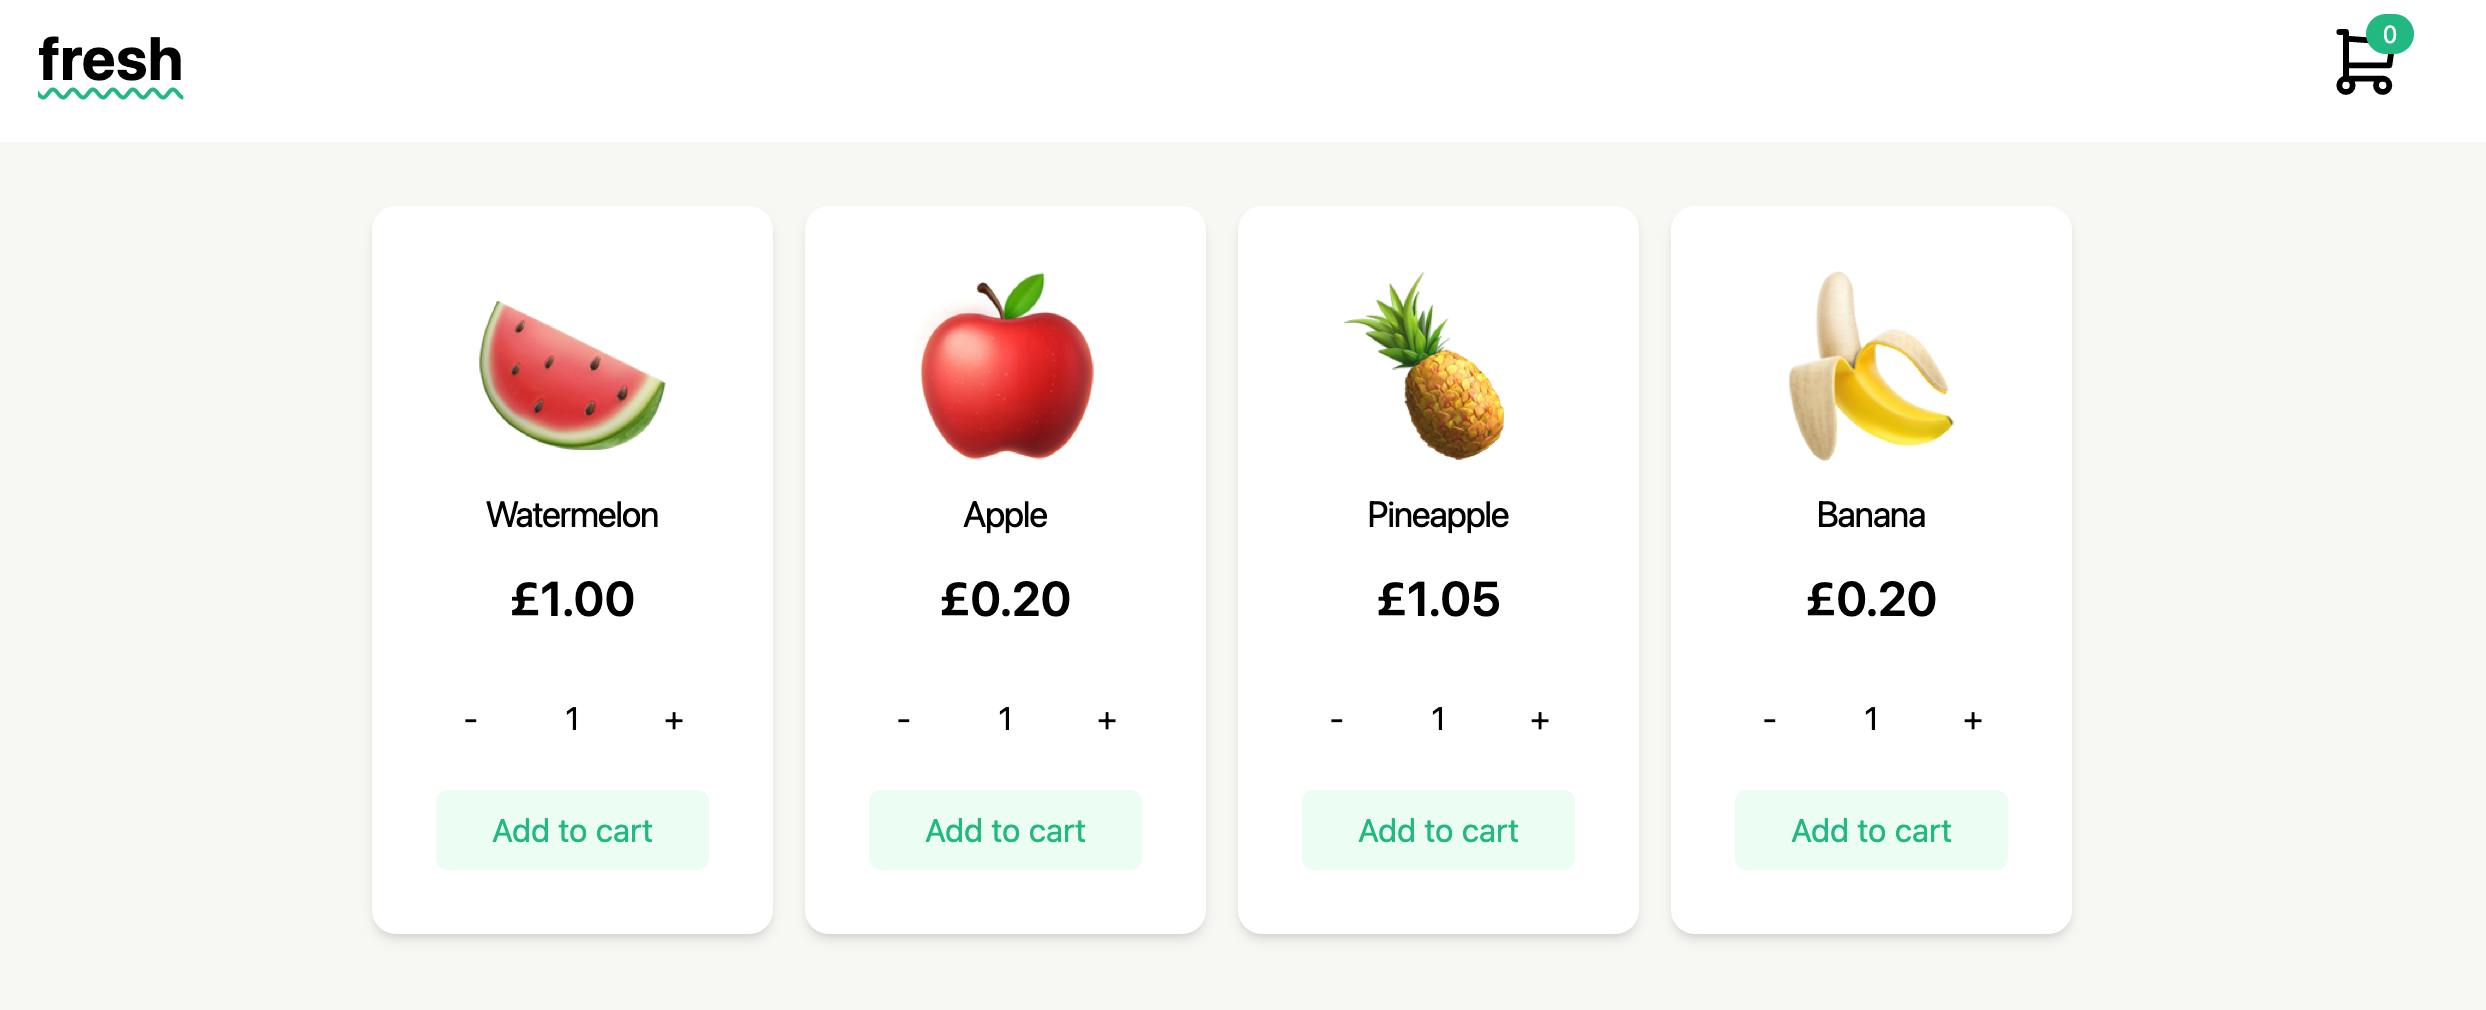 A screenshot of the fruit shop. Now the prices of the products are displaying correctly: £1.00, £0.20, £1.05, £0.20